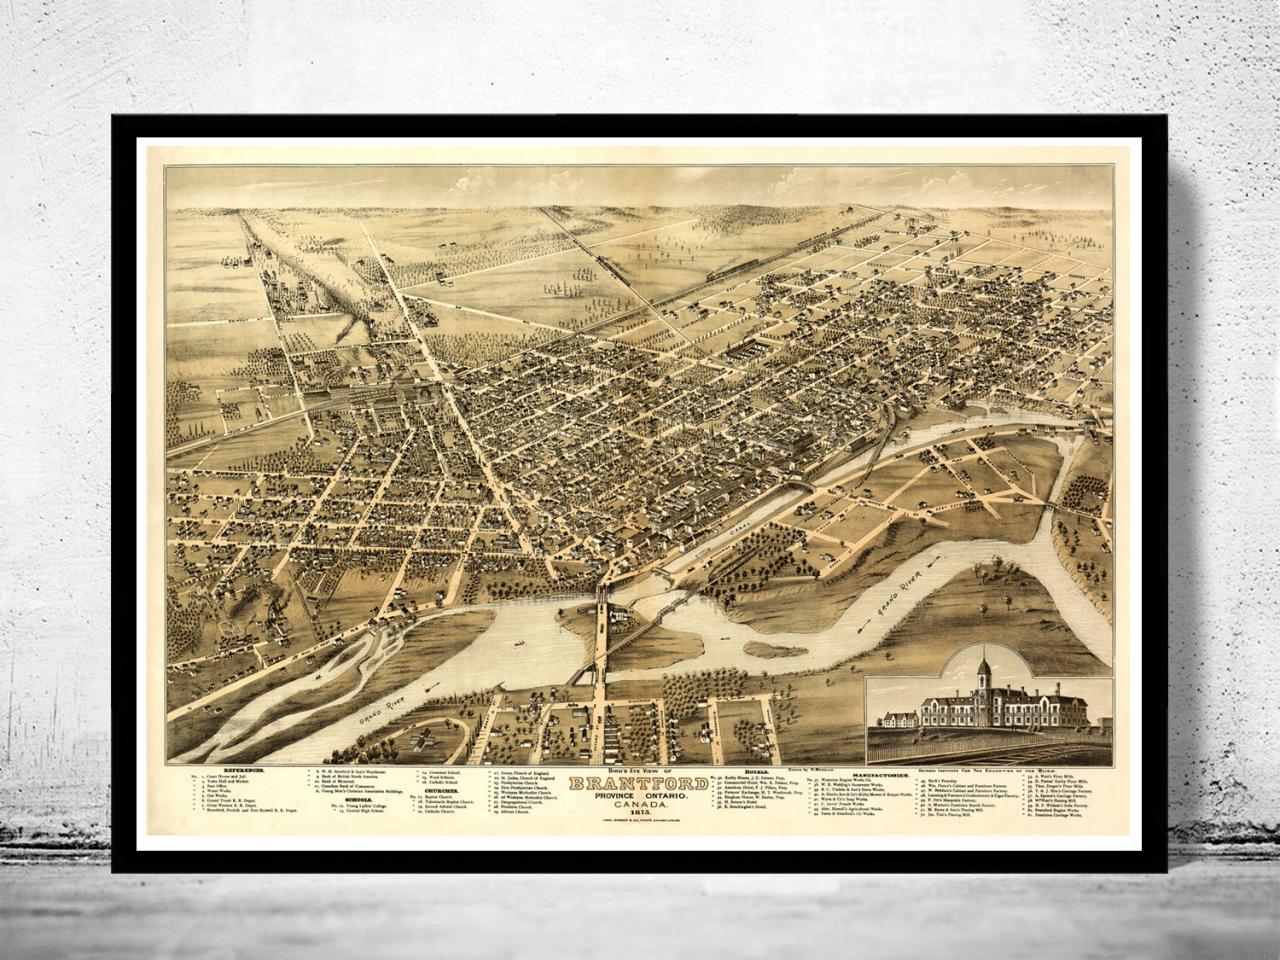 Old Map Of Brantford Canada 1875 Panoramic View